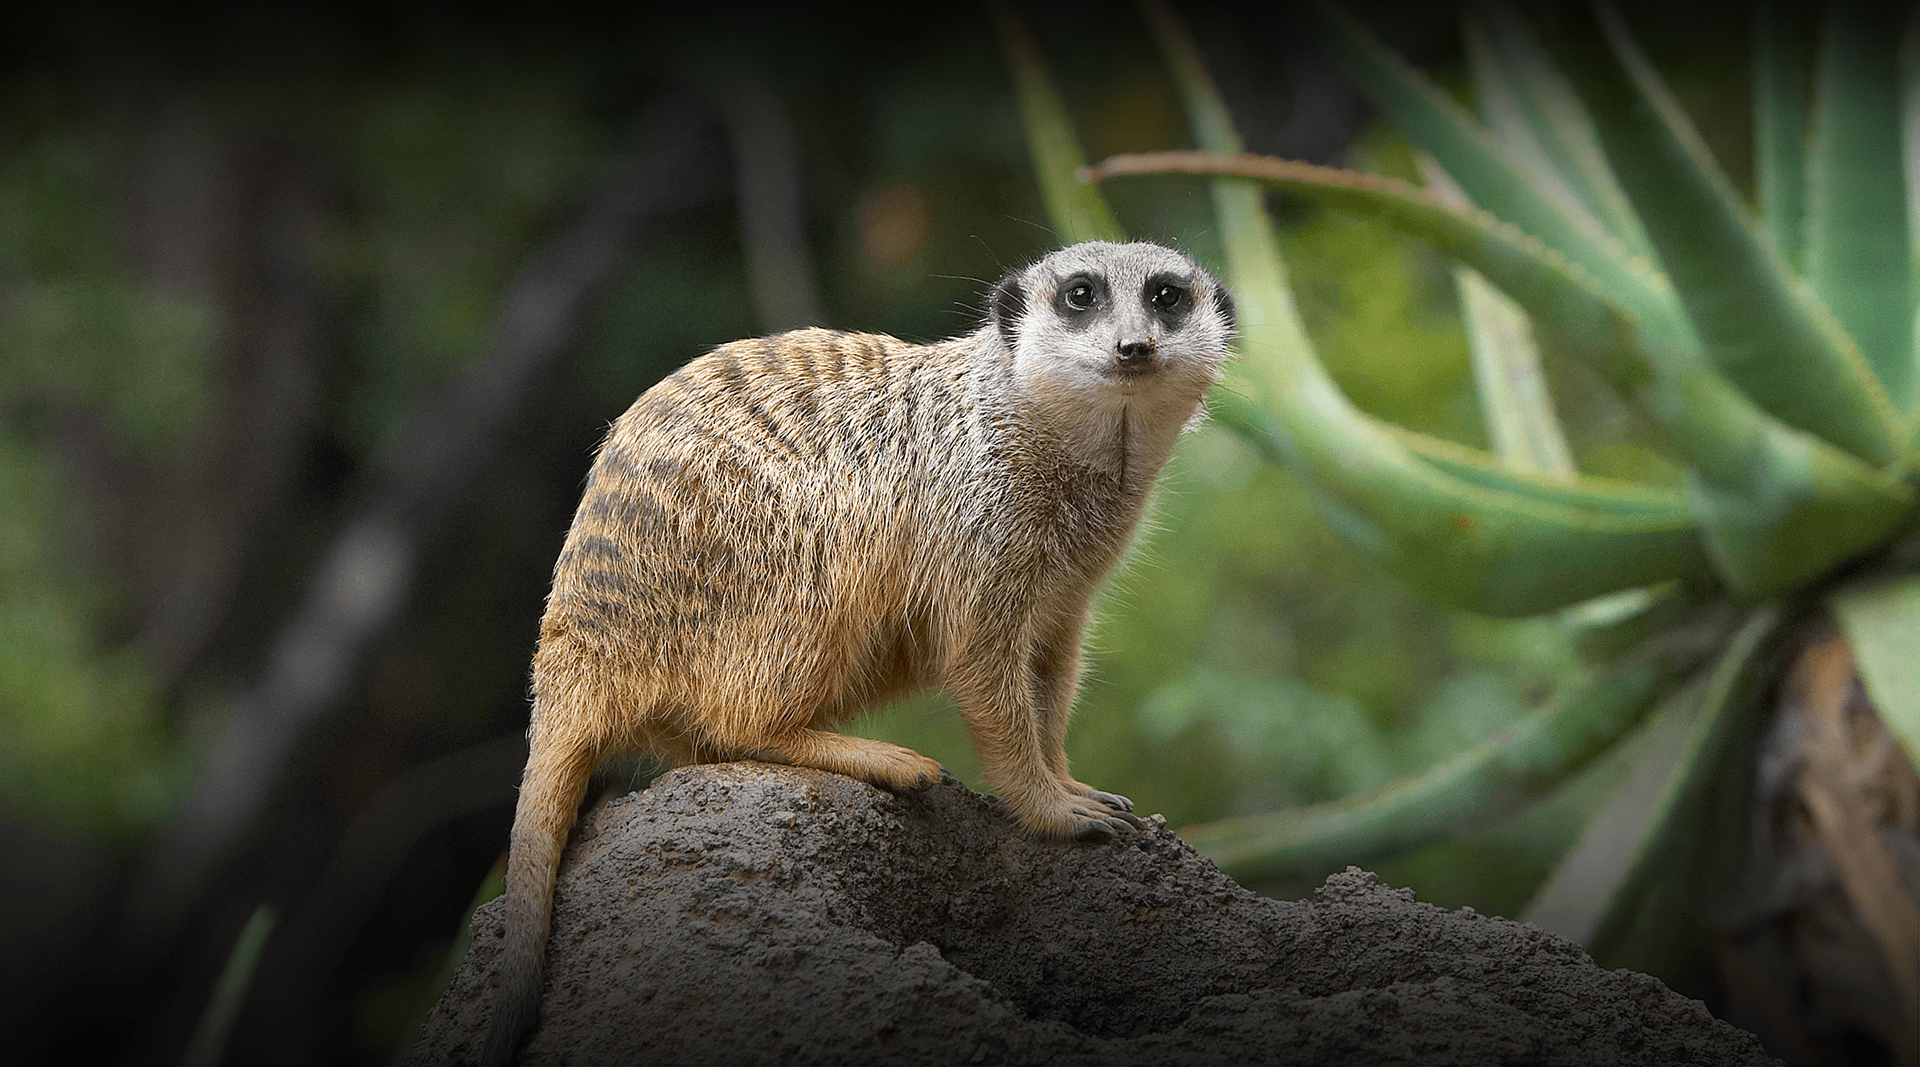 Meerkat stands on a rock, looking at camera